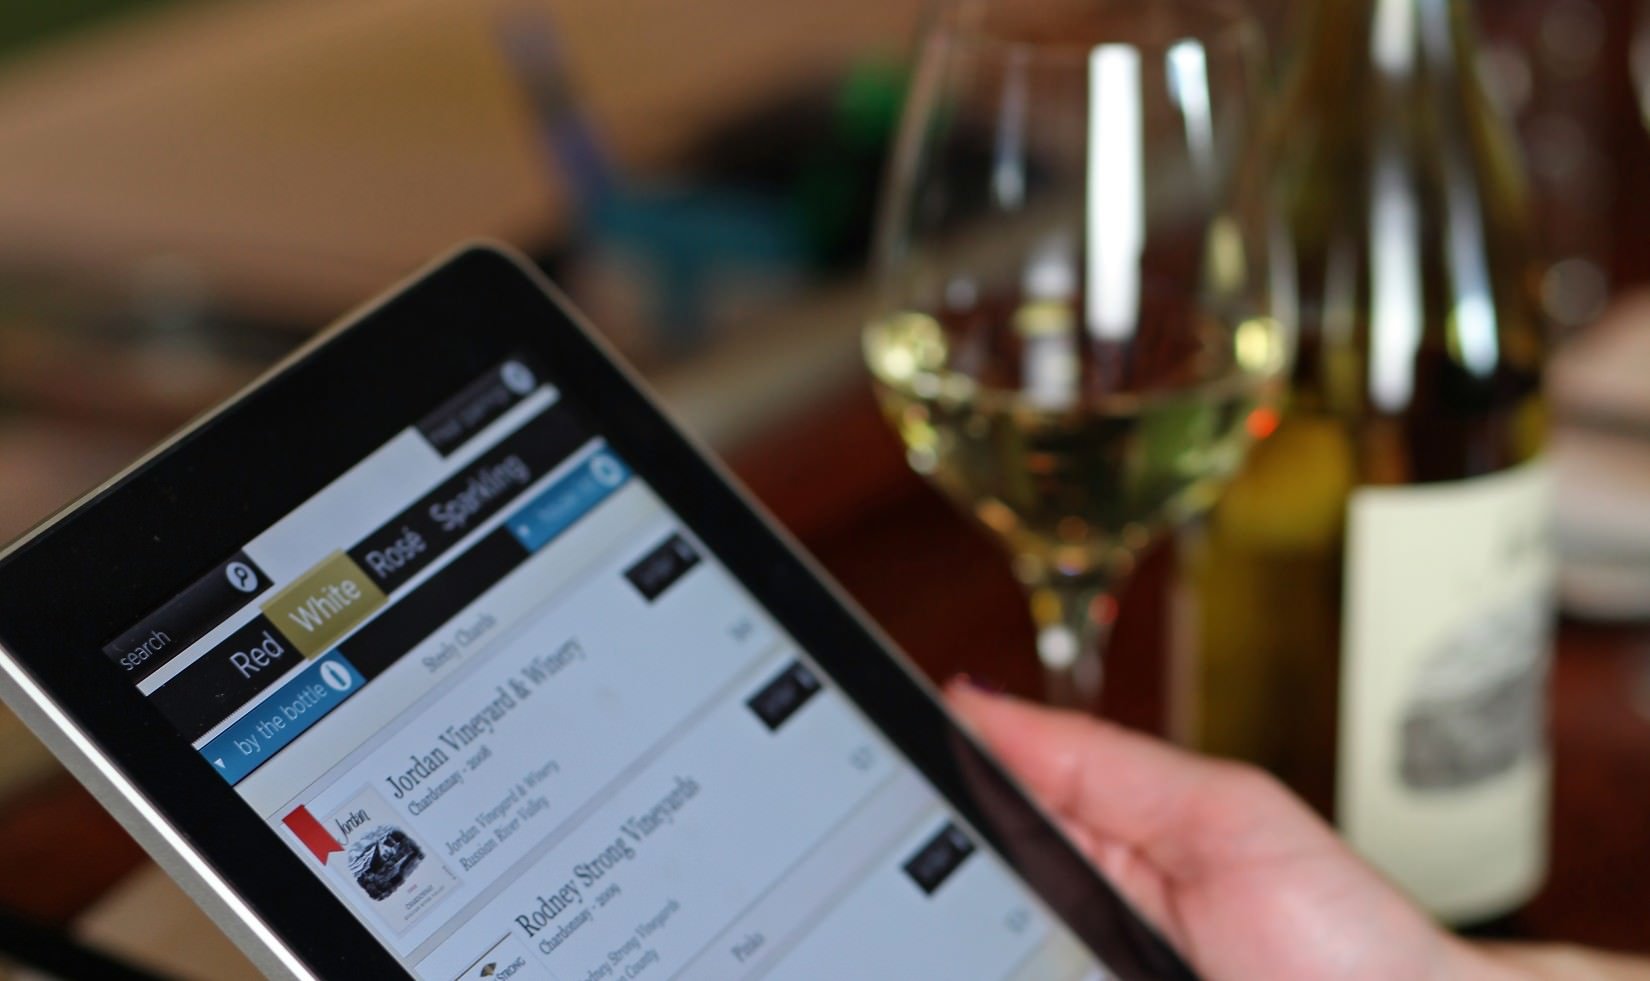 close up of an iPad displaying the Tastevin application with a bottle of Jordan Winery Chardonnay in the background